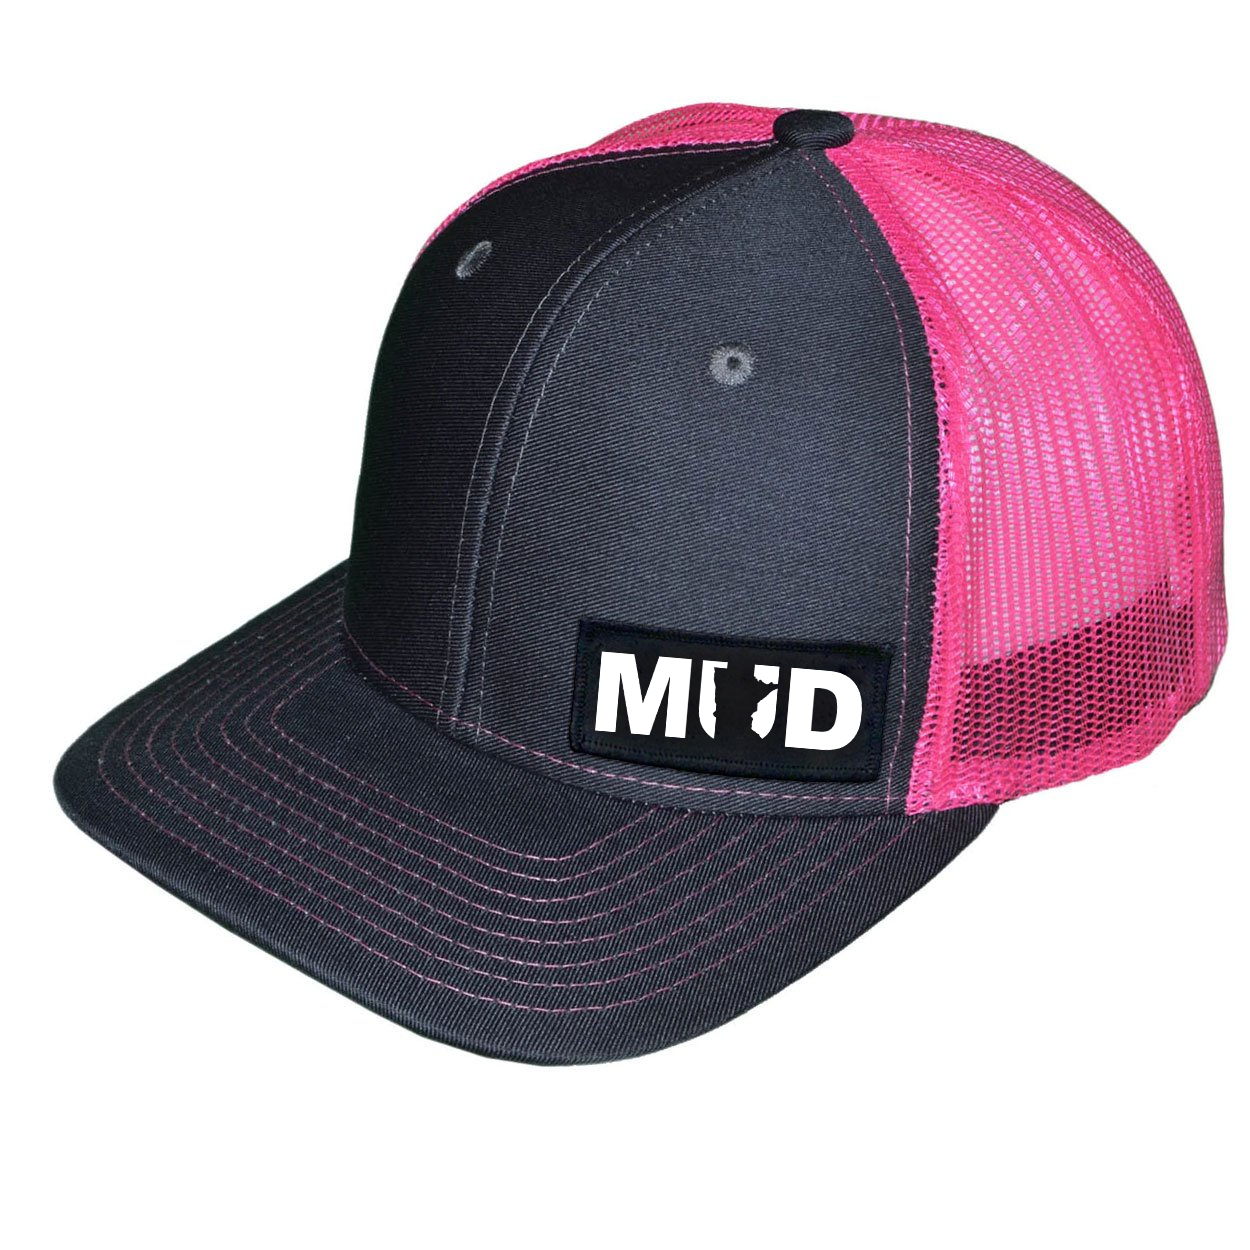 Mud Minnesota Night Out Woven Patch Snapback Trucker Hat Charcoal/Neon Pink (White Logo)